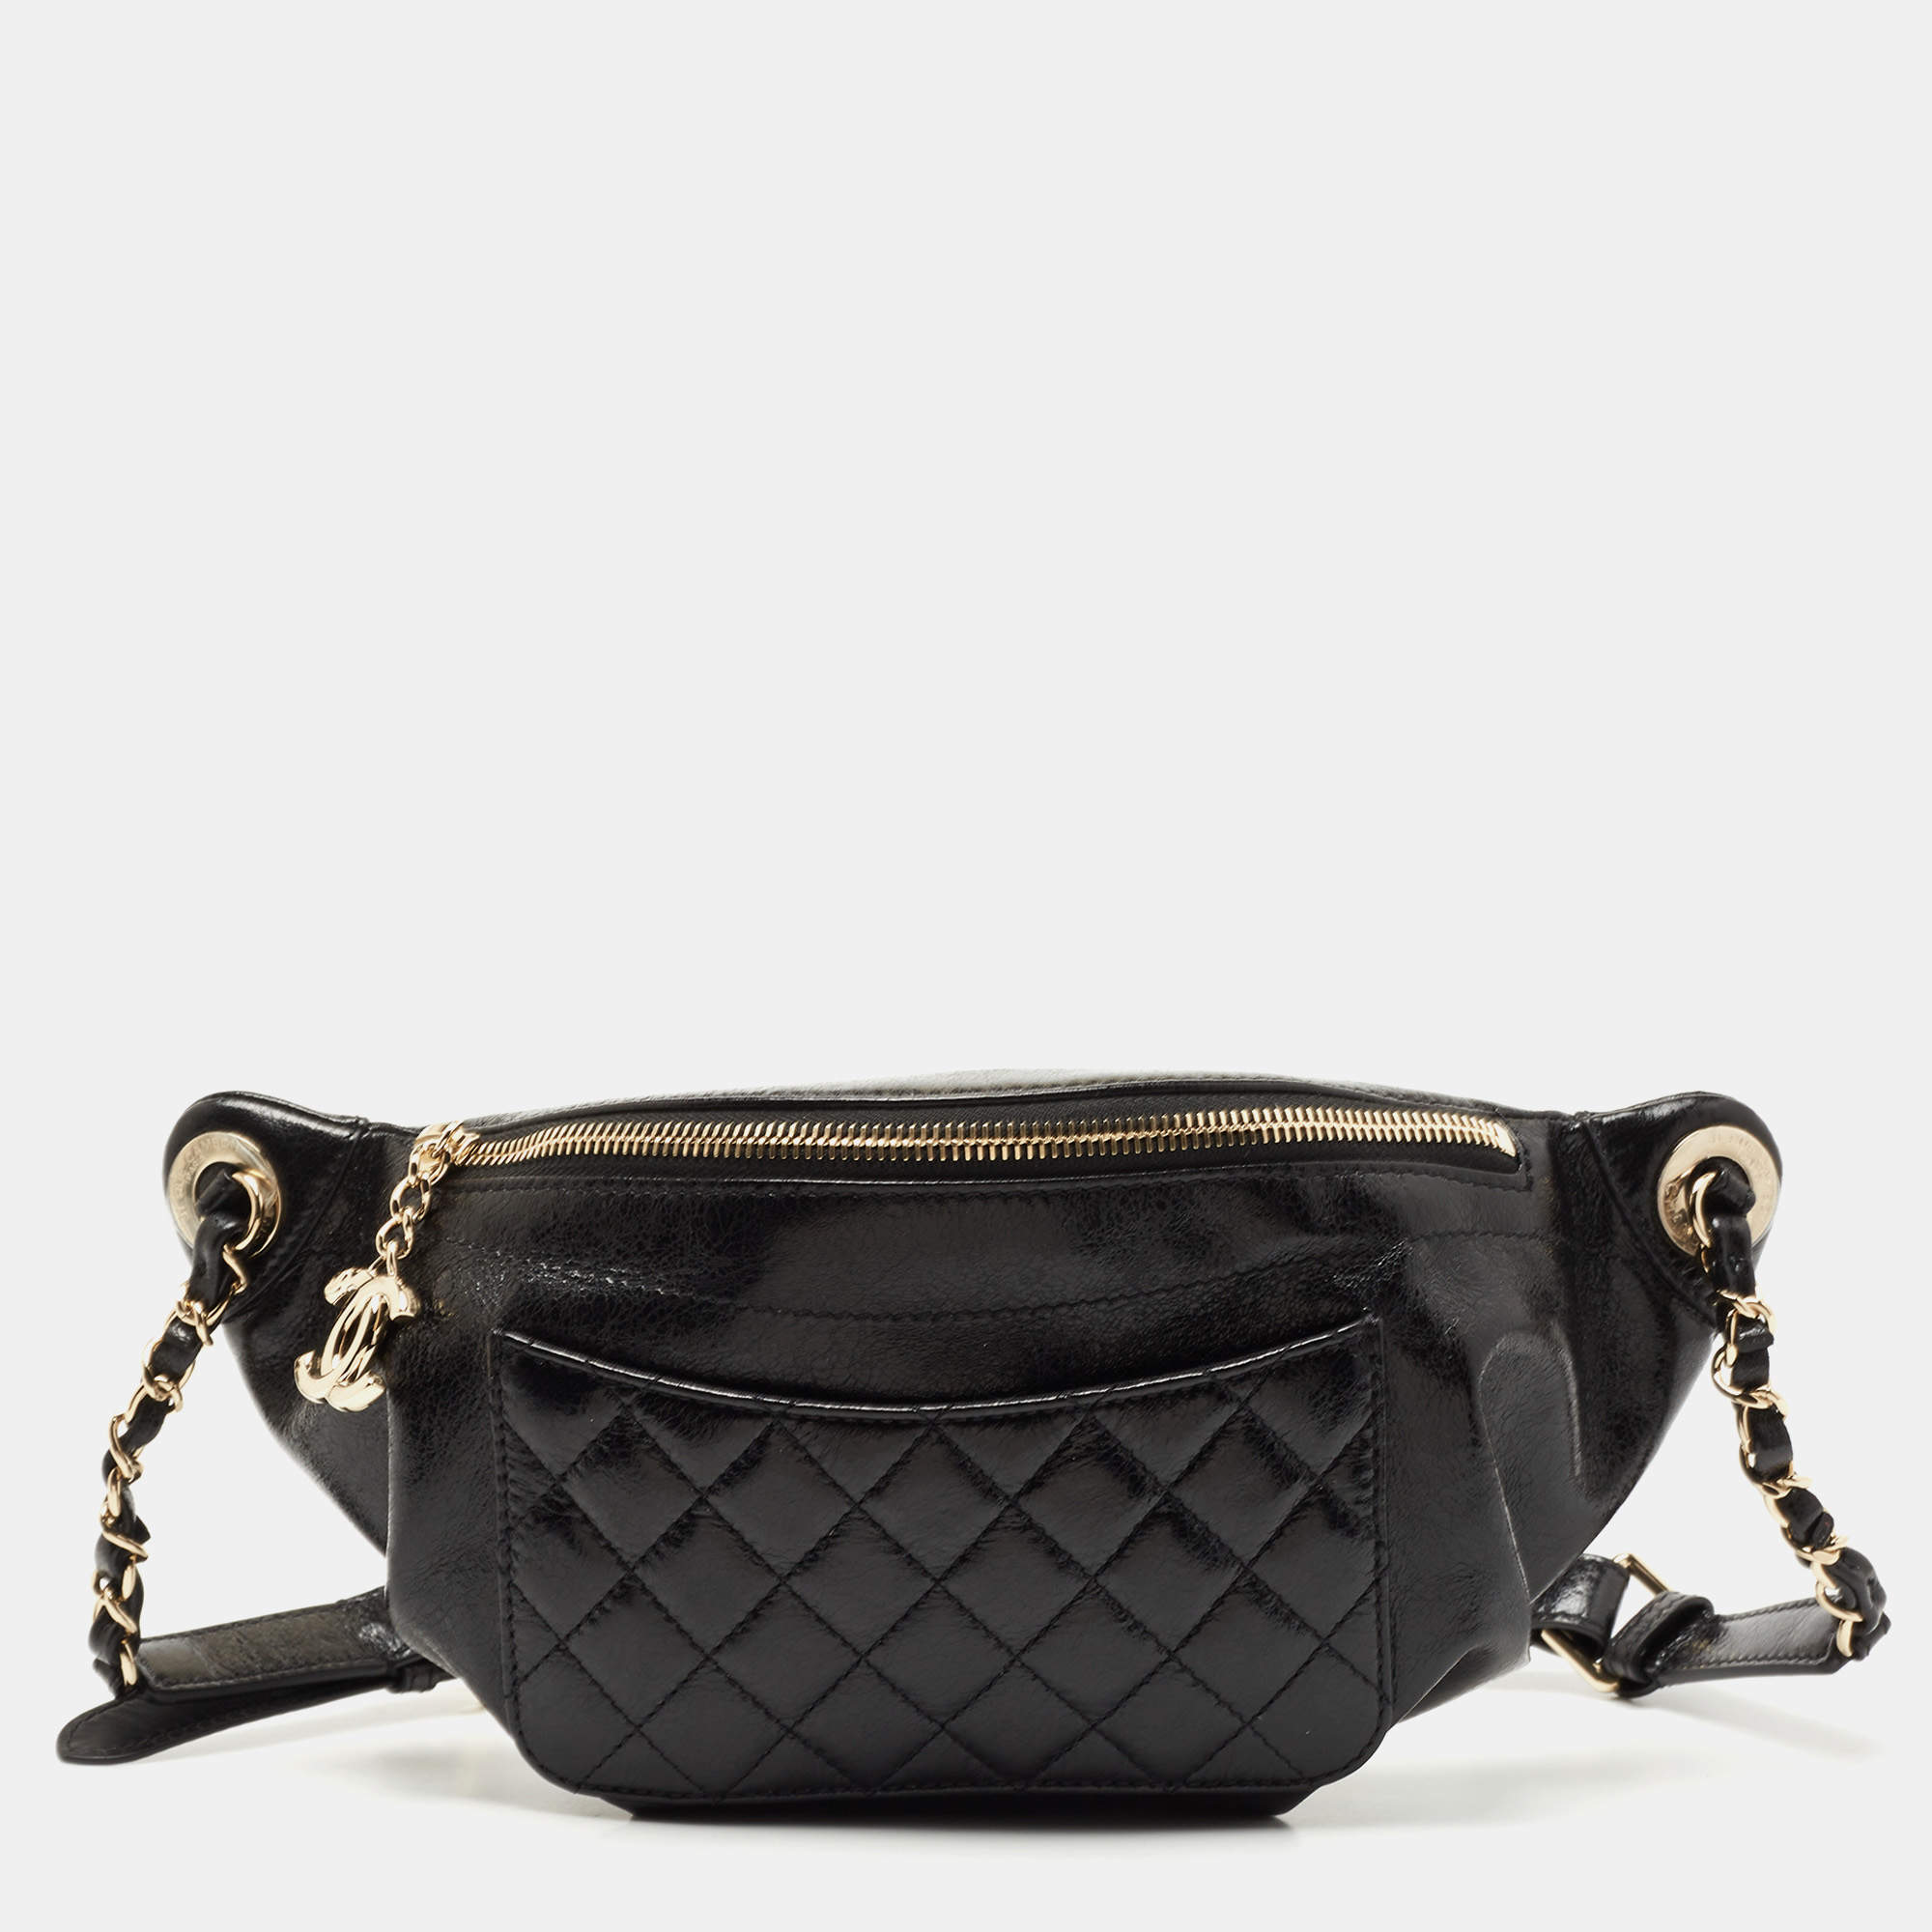 Chanel Blue CC Quilted Fanny Pack Waist Belt Bag – The Closet